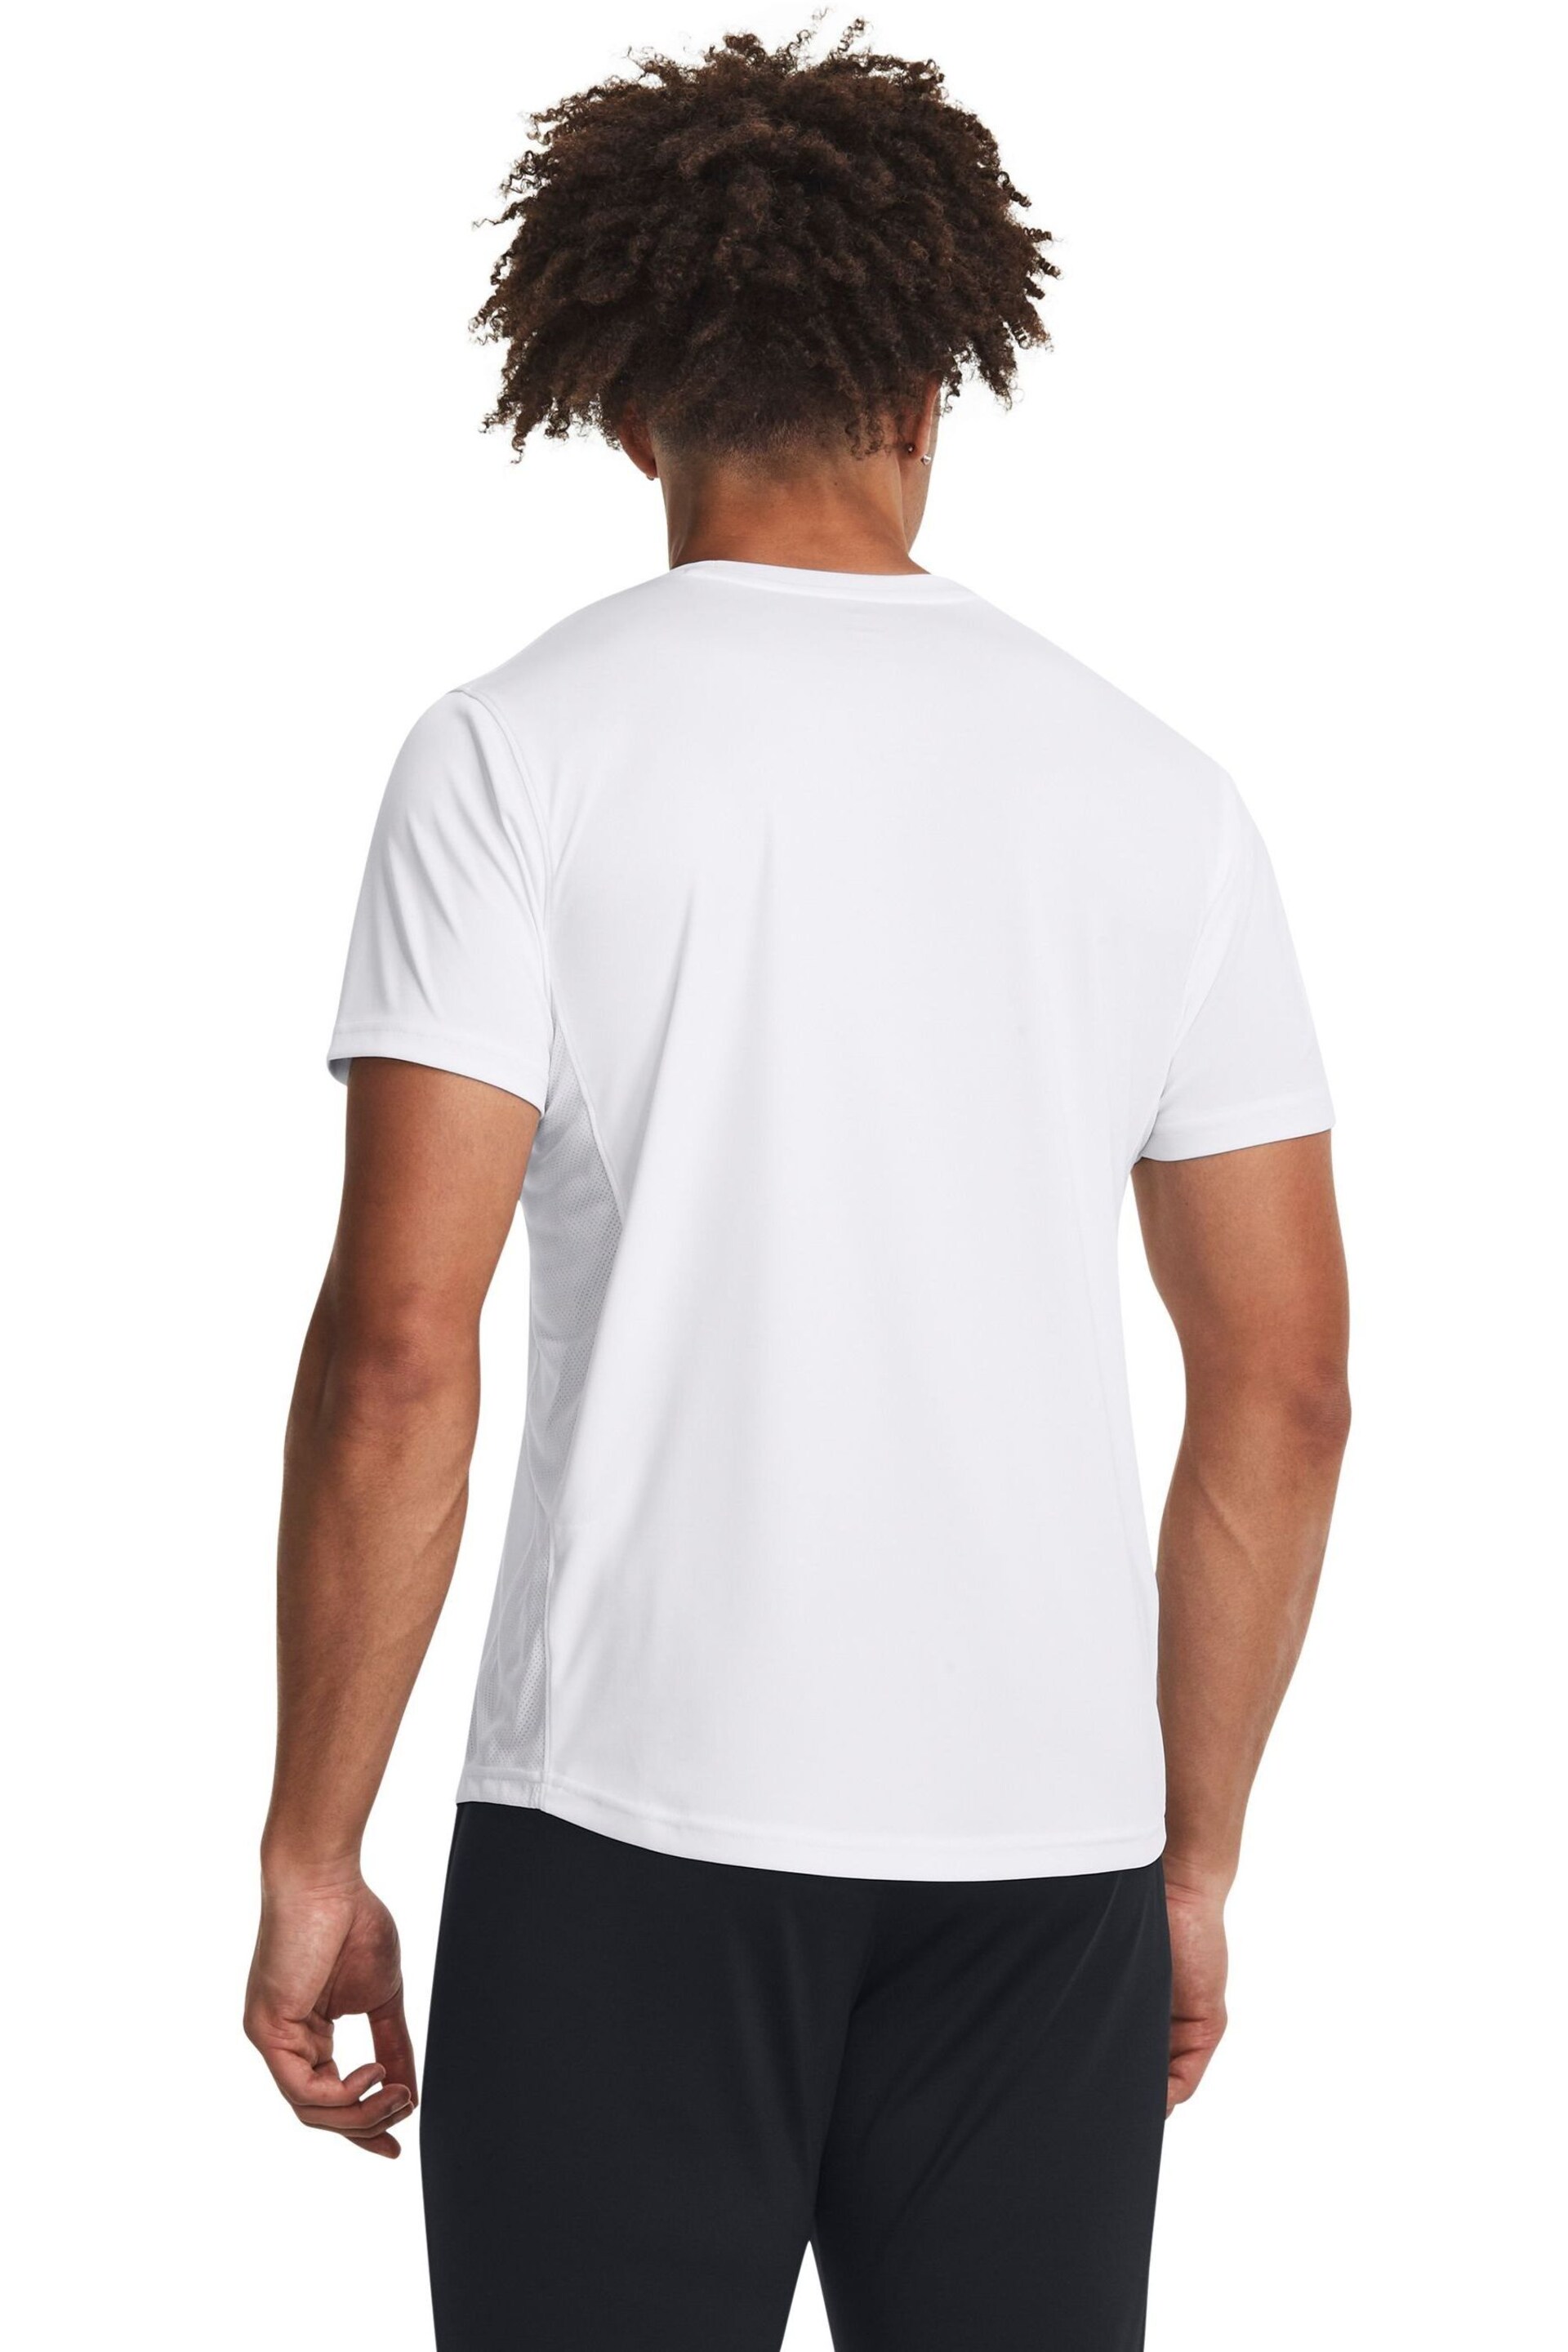 Under Armour White Challenger Train Short Sleeve T-Shirt - Image 2 of 6